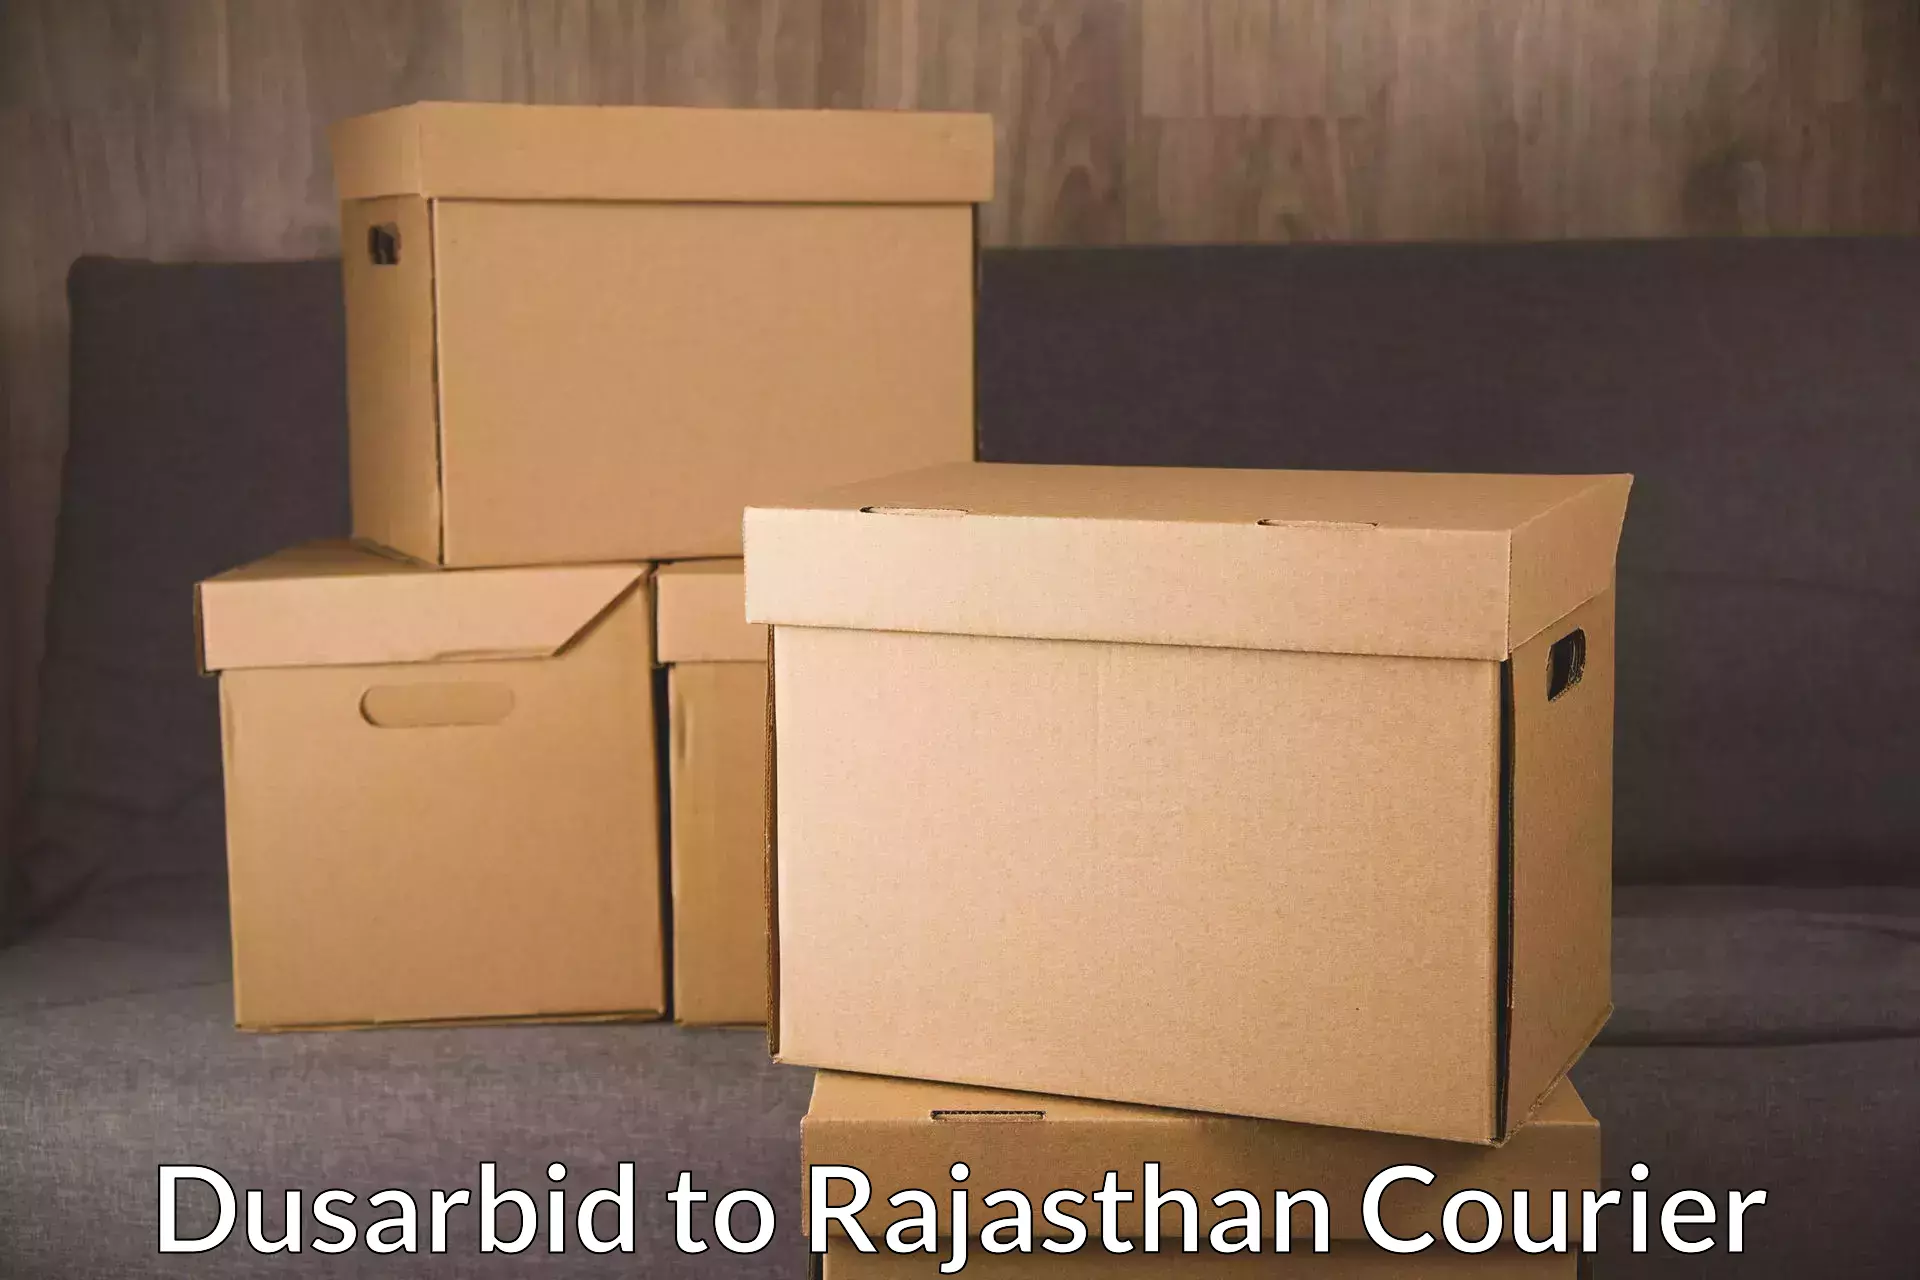 Professional parcel services Dusarbid to Rajasthan